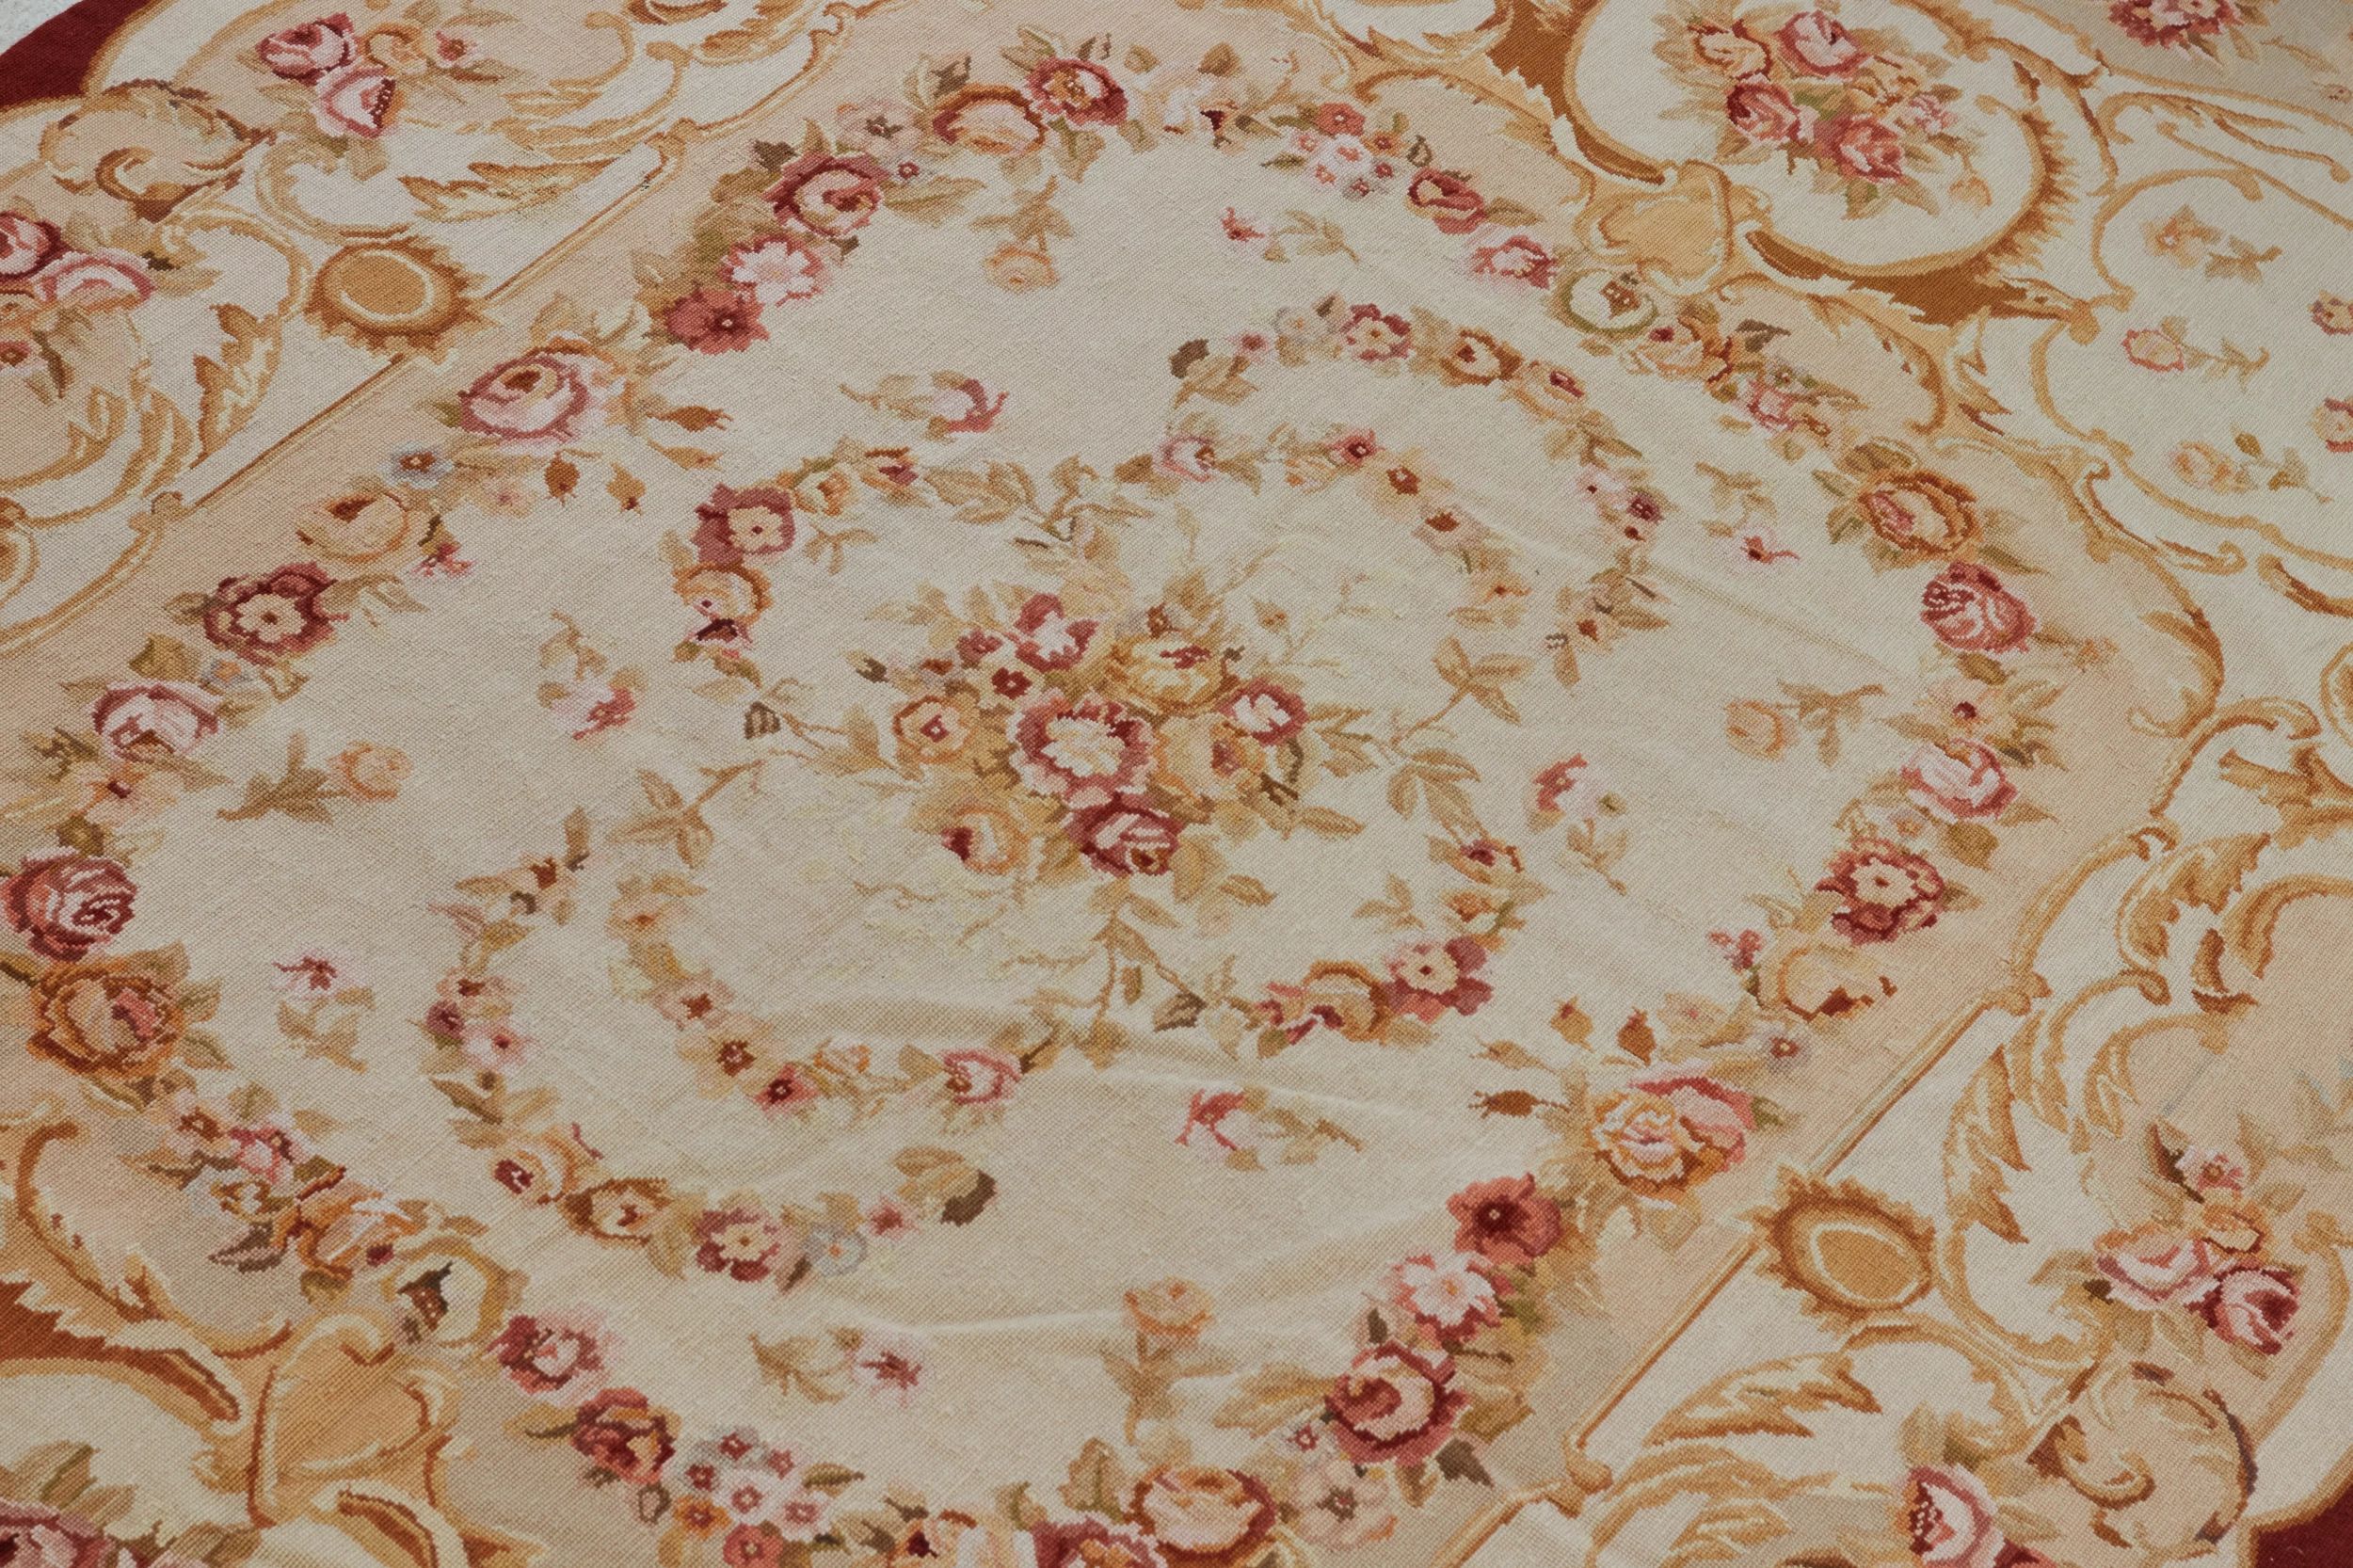 19th century French carpet in Aubusson style. - Image 3 of 8